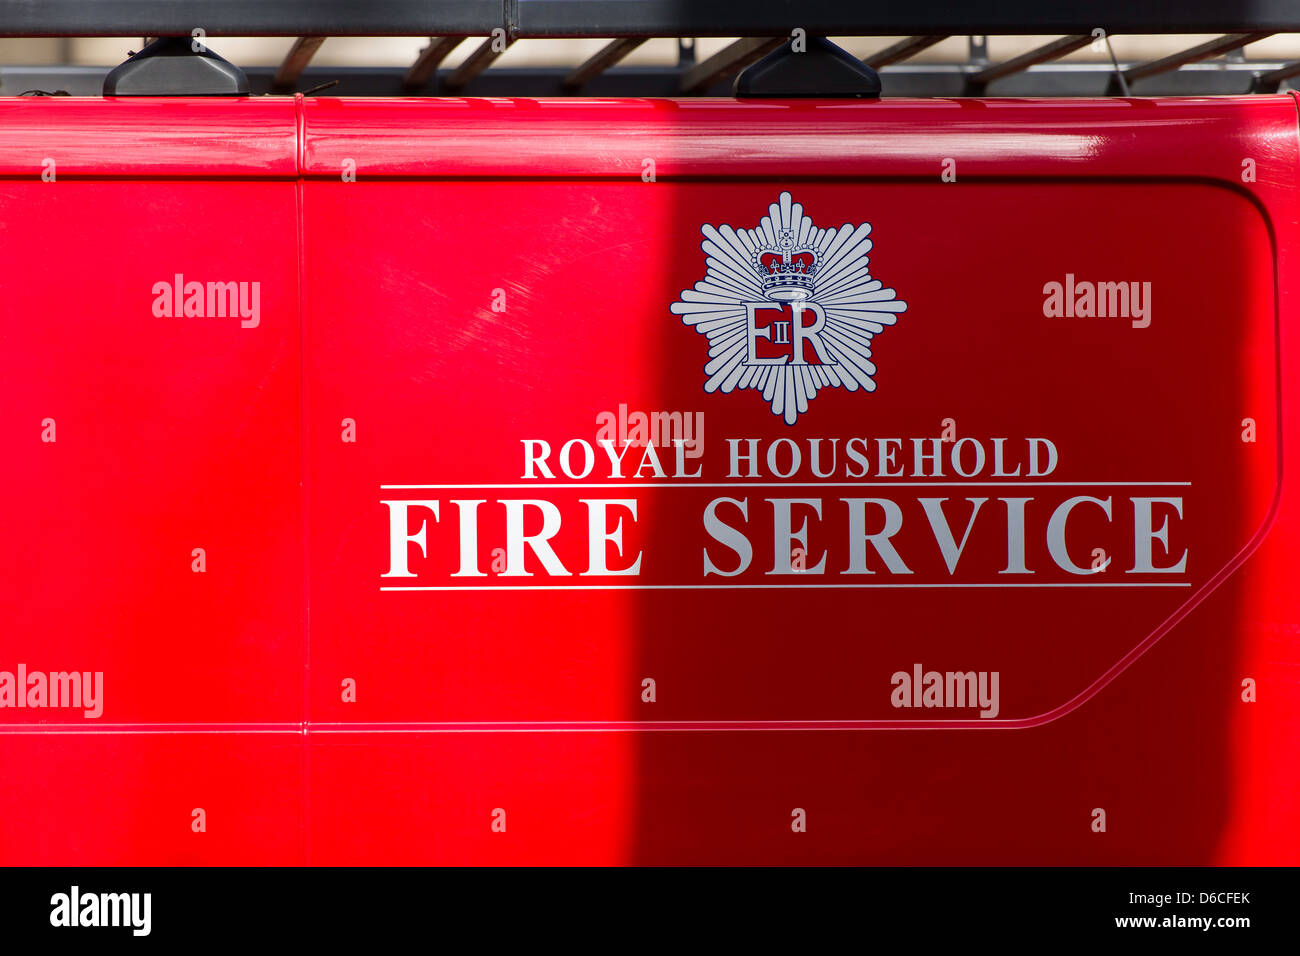 Royal Household Fire Service Stock Photo